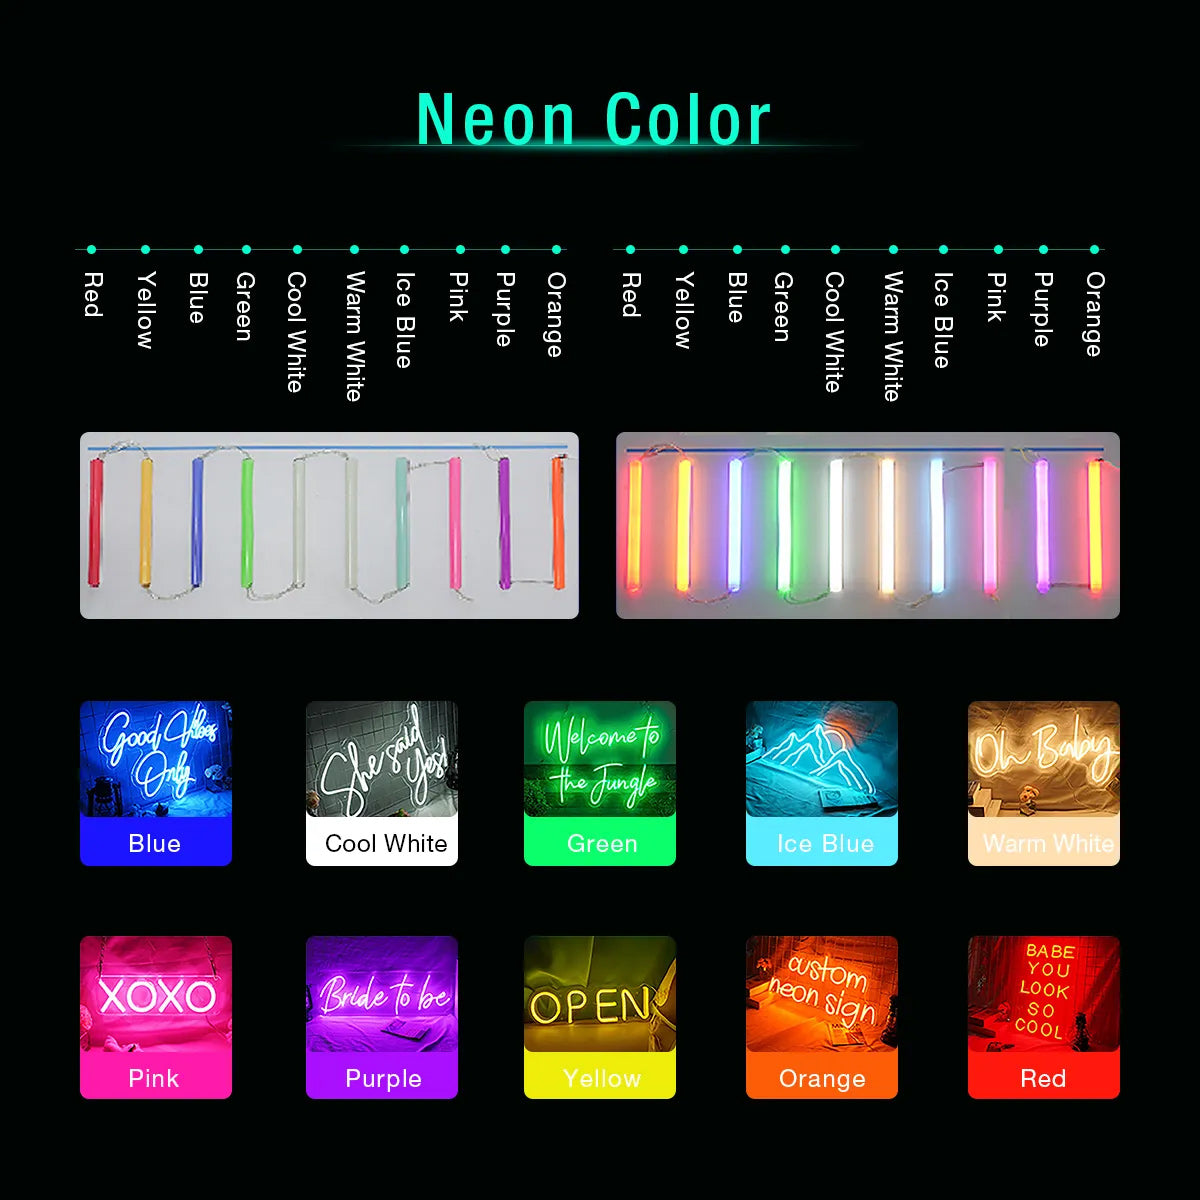 NEONIP-100% Handmade It's The Most Wonderful Time Of The Year Merry Christmas Neon Sign Christmas Decorations